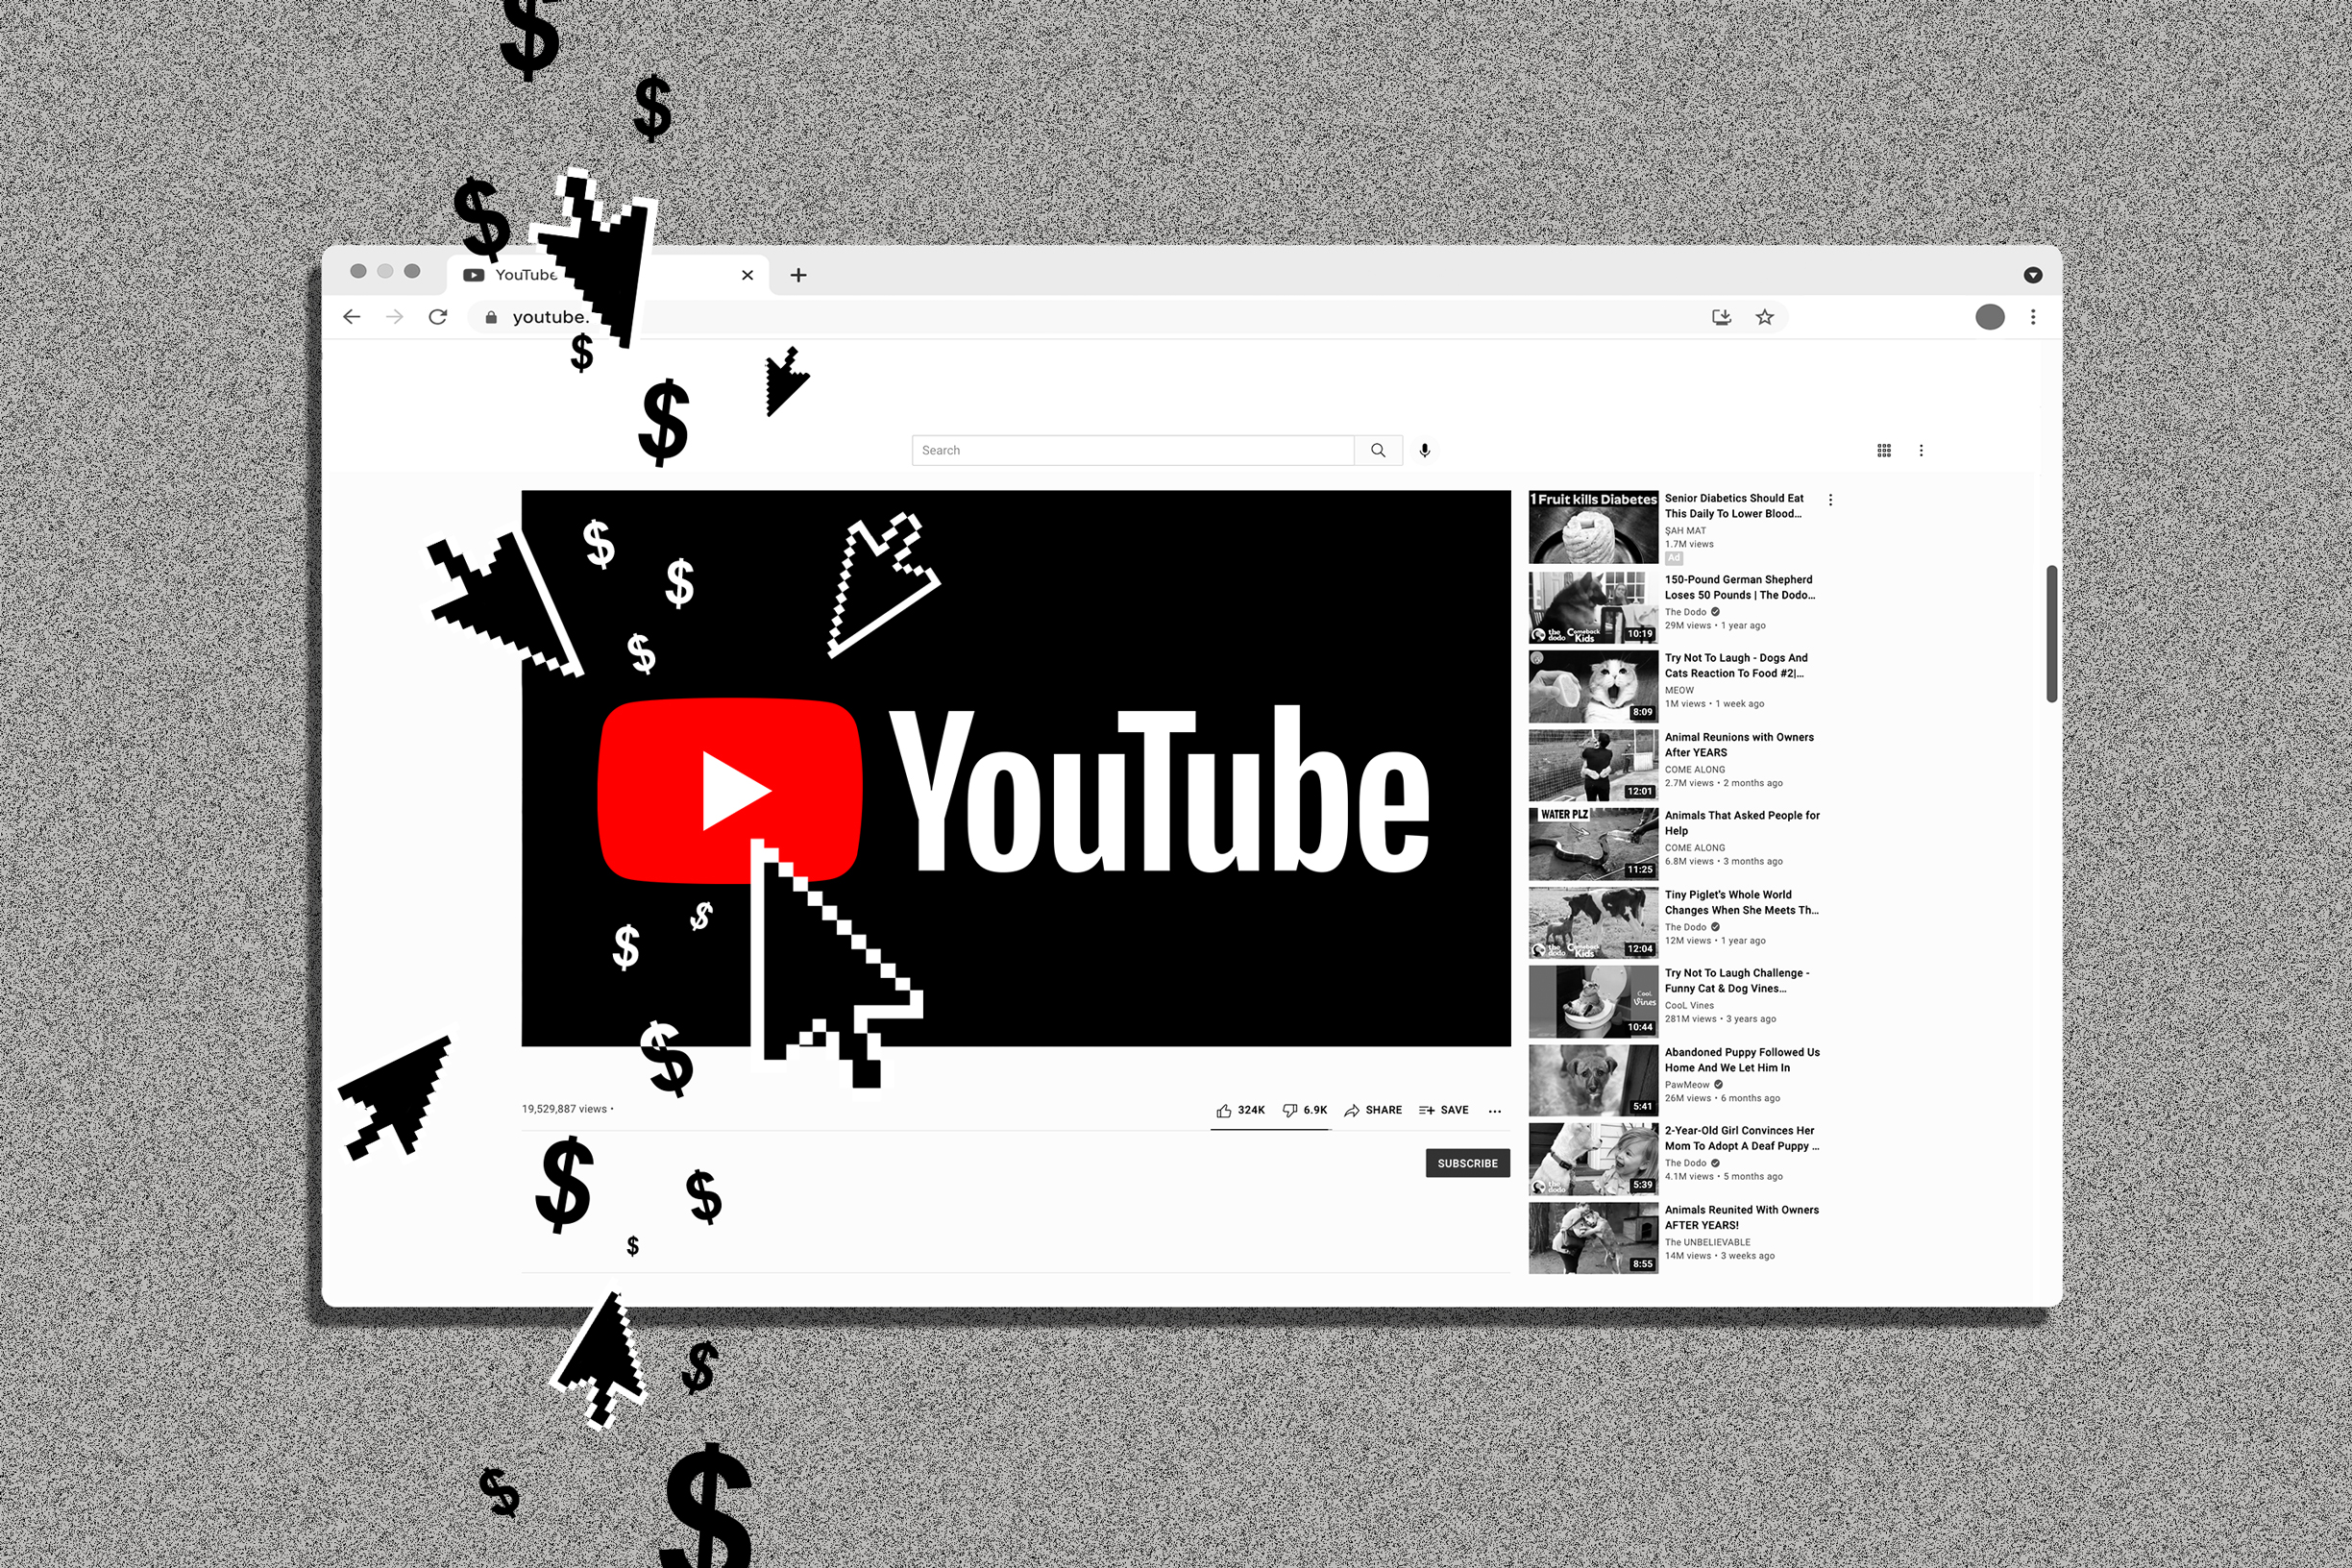 Get Paid to Like YouTube Videos